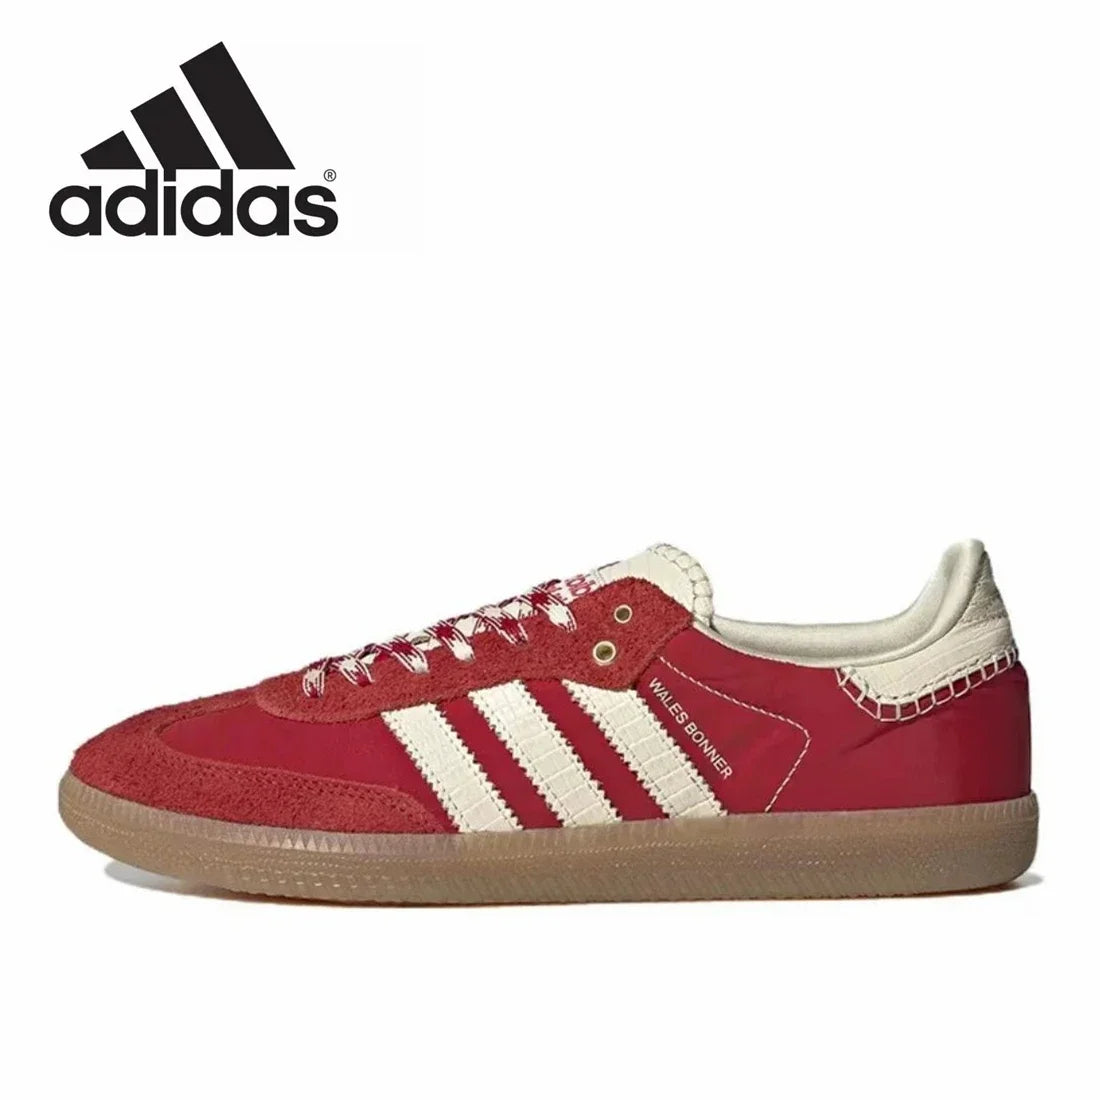 Adidas Samba Pony Wales Bonner Leopard German Training Gazelle Shoes Retro Versatile Sports and Casual Board Shoes sneakers